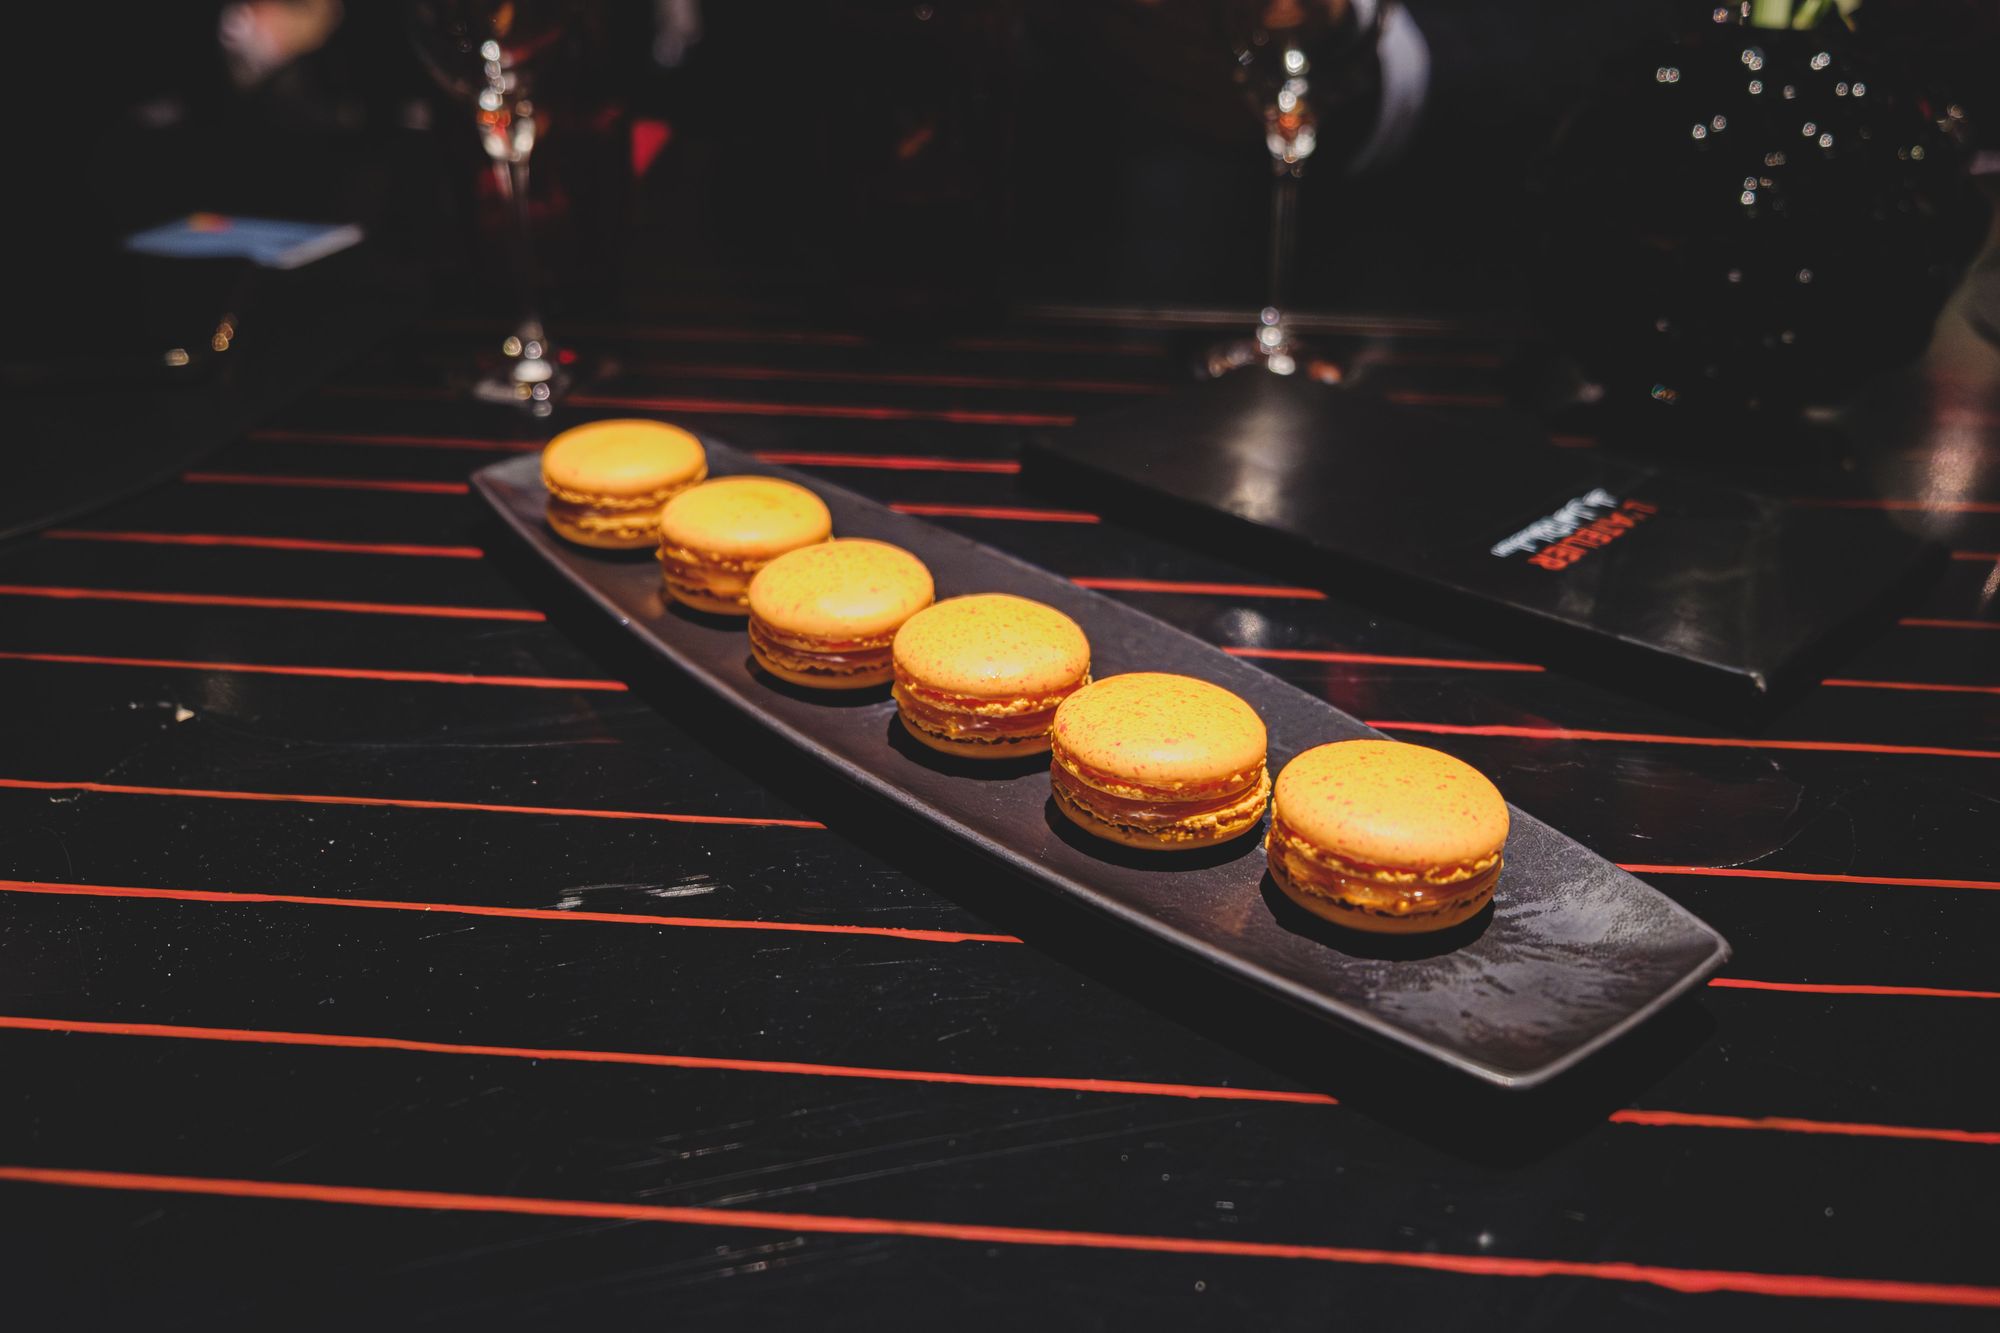 L'Atelier de Joël Robuchon MGM Grand [REVIEW] – $225 Fine French Dining in Las Vegas